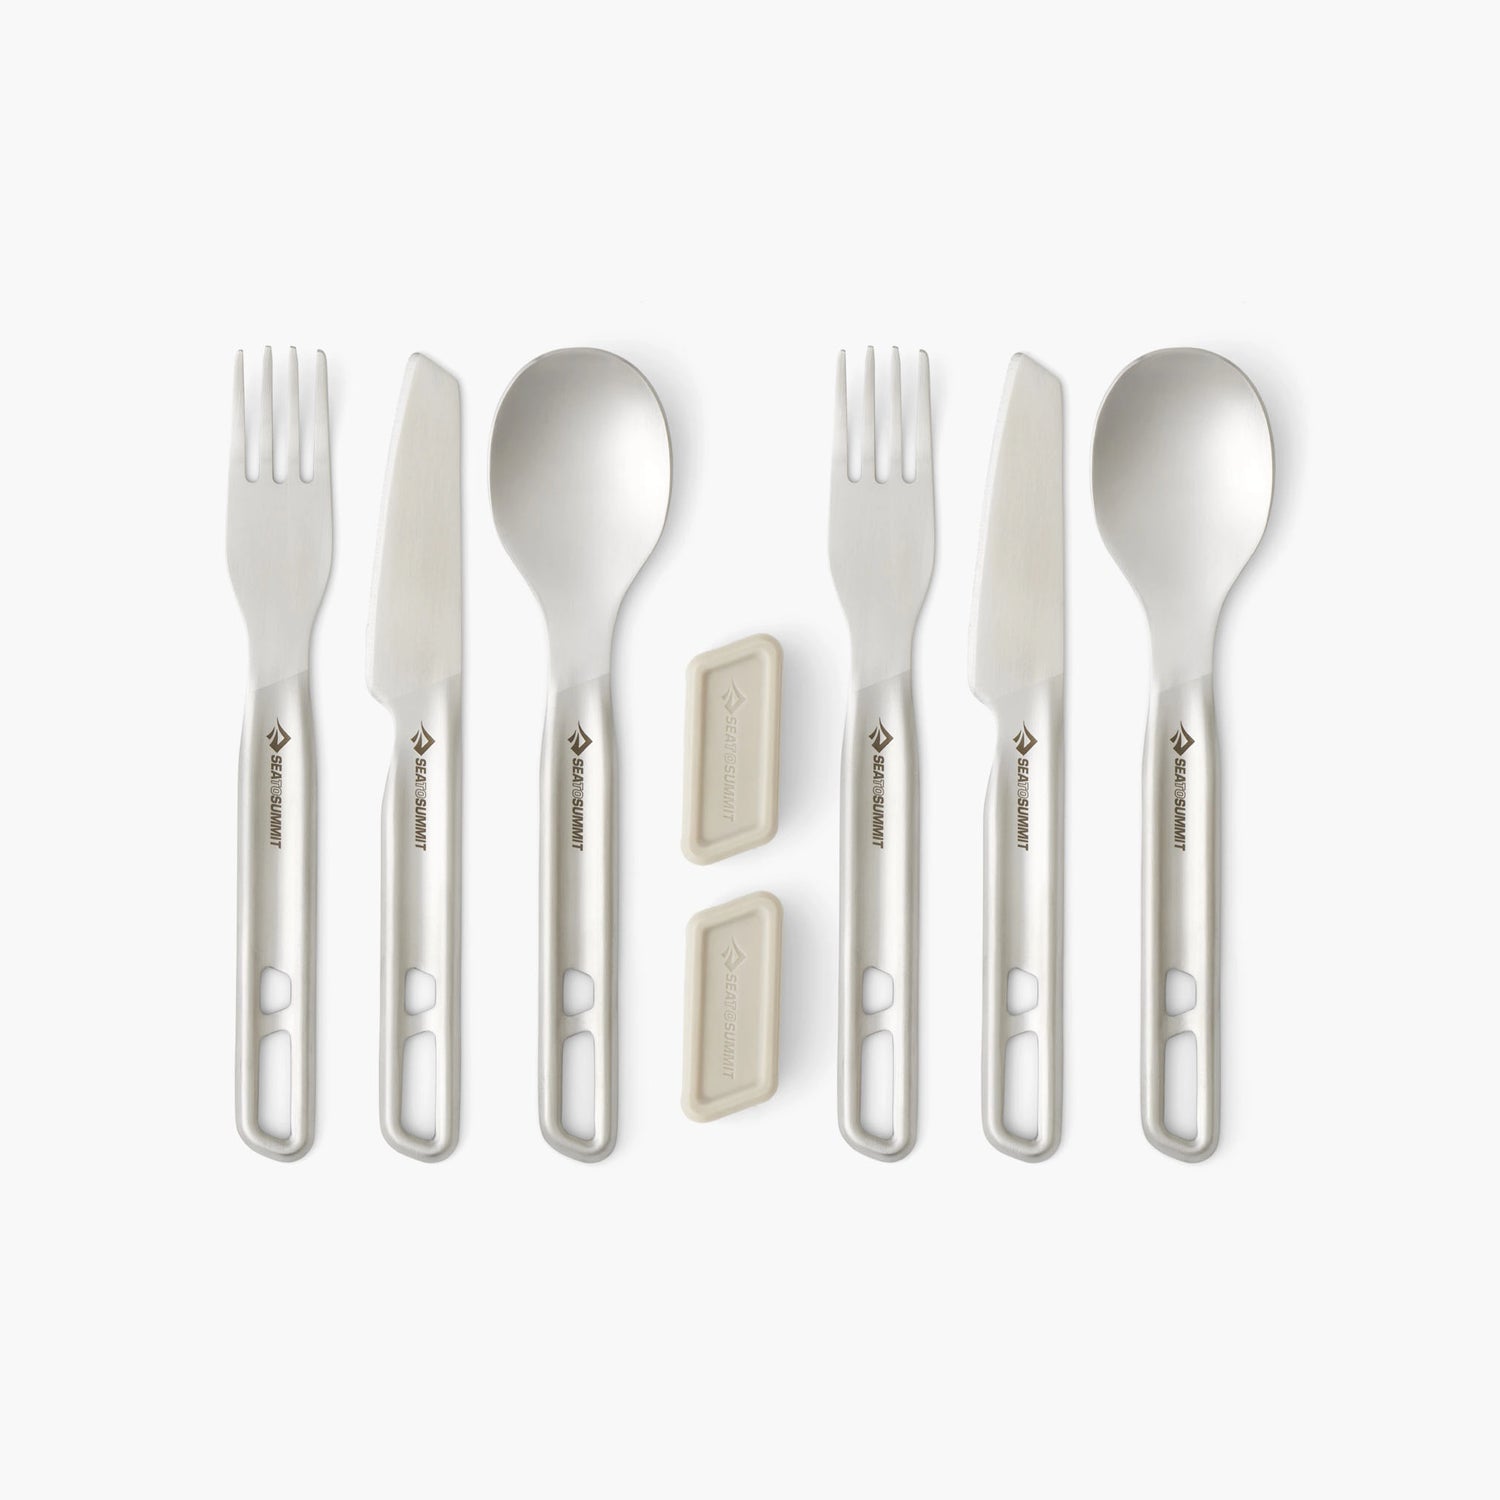 Detour Stainless Steel Cutlery Set (2 Person 6 Piece)